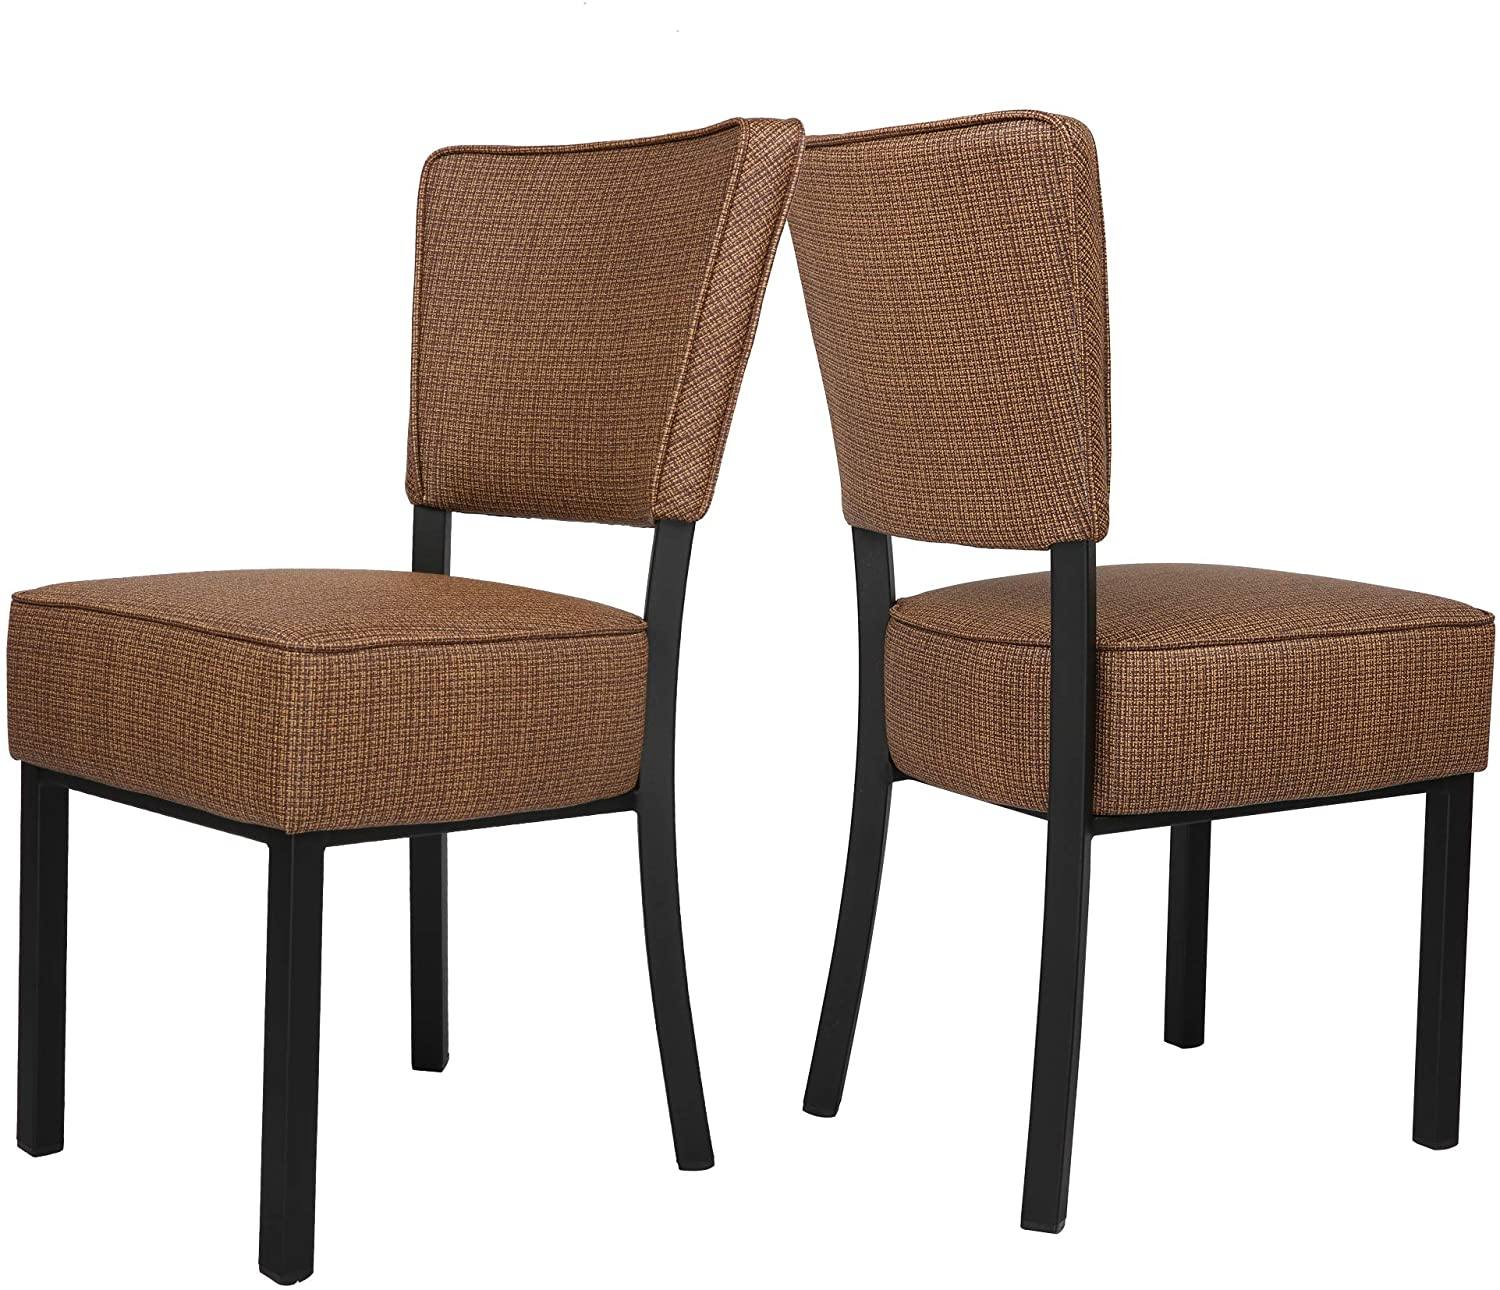 Classic Dining Chair Set of 2, Modern Style Family Leisure Chair with Stainless Steel Legs, PU Leather High Back Side Chair, Coffee - Bosonshop